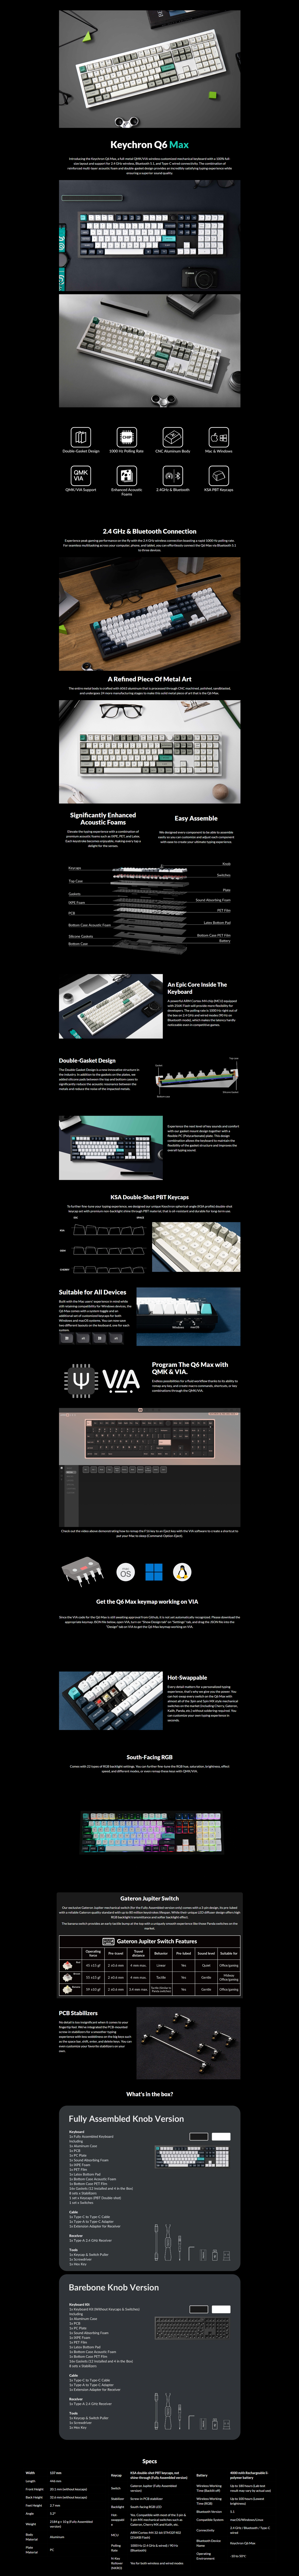 A large marketing image providing additional information about the product Keychron Q6 Max Full Assembled Knob RGB Hot-Swap QMK Custom Wireless Mechanical Keyboard Carbon Black (Gateron Brown Switch) - Additional alt info not provided